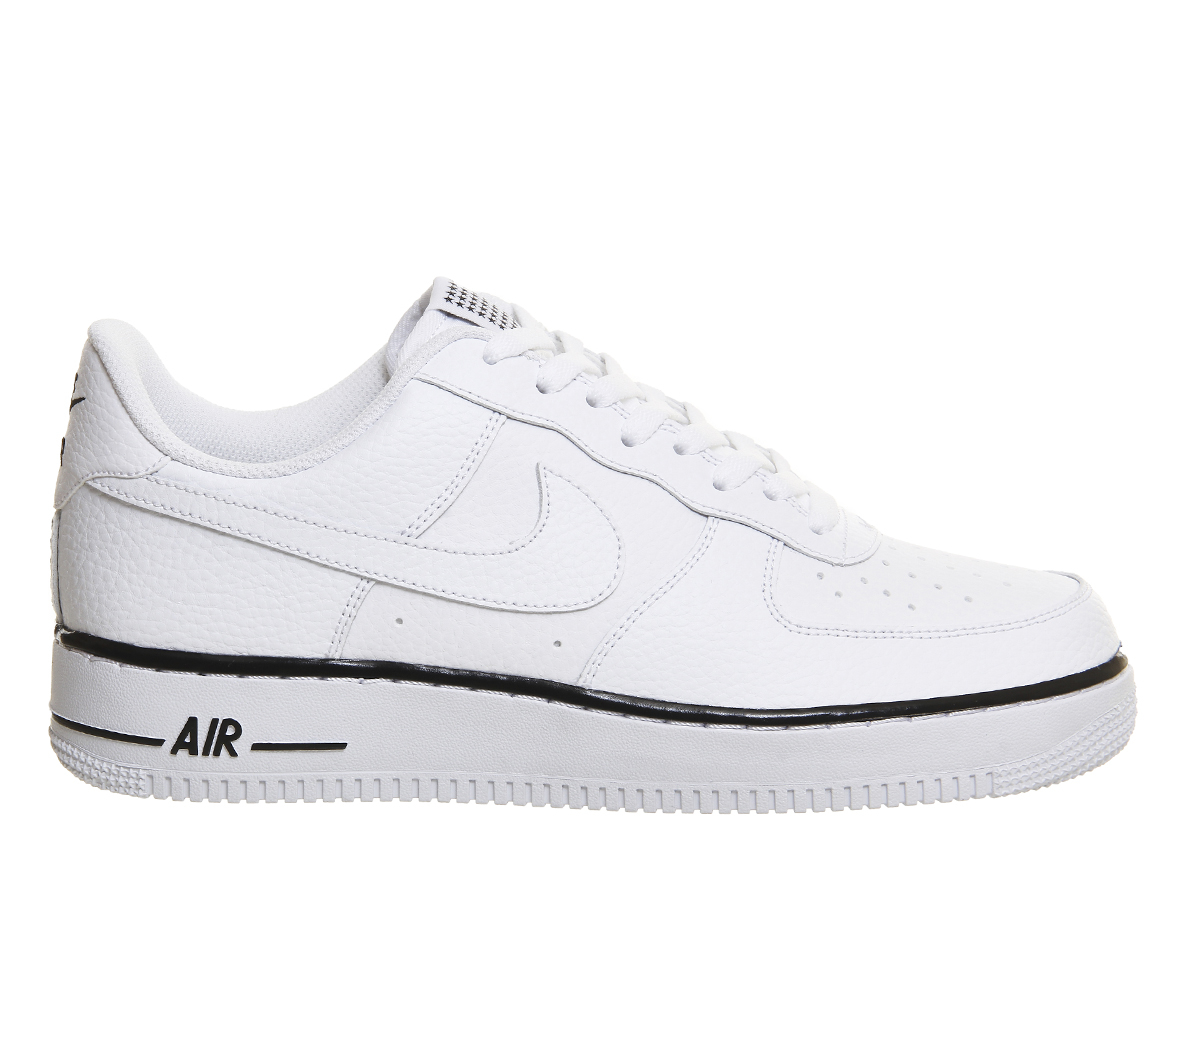 Lyst - Nike Air Force One in White for Men